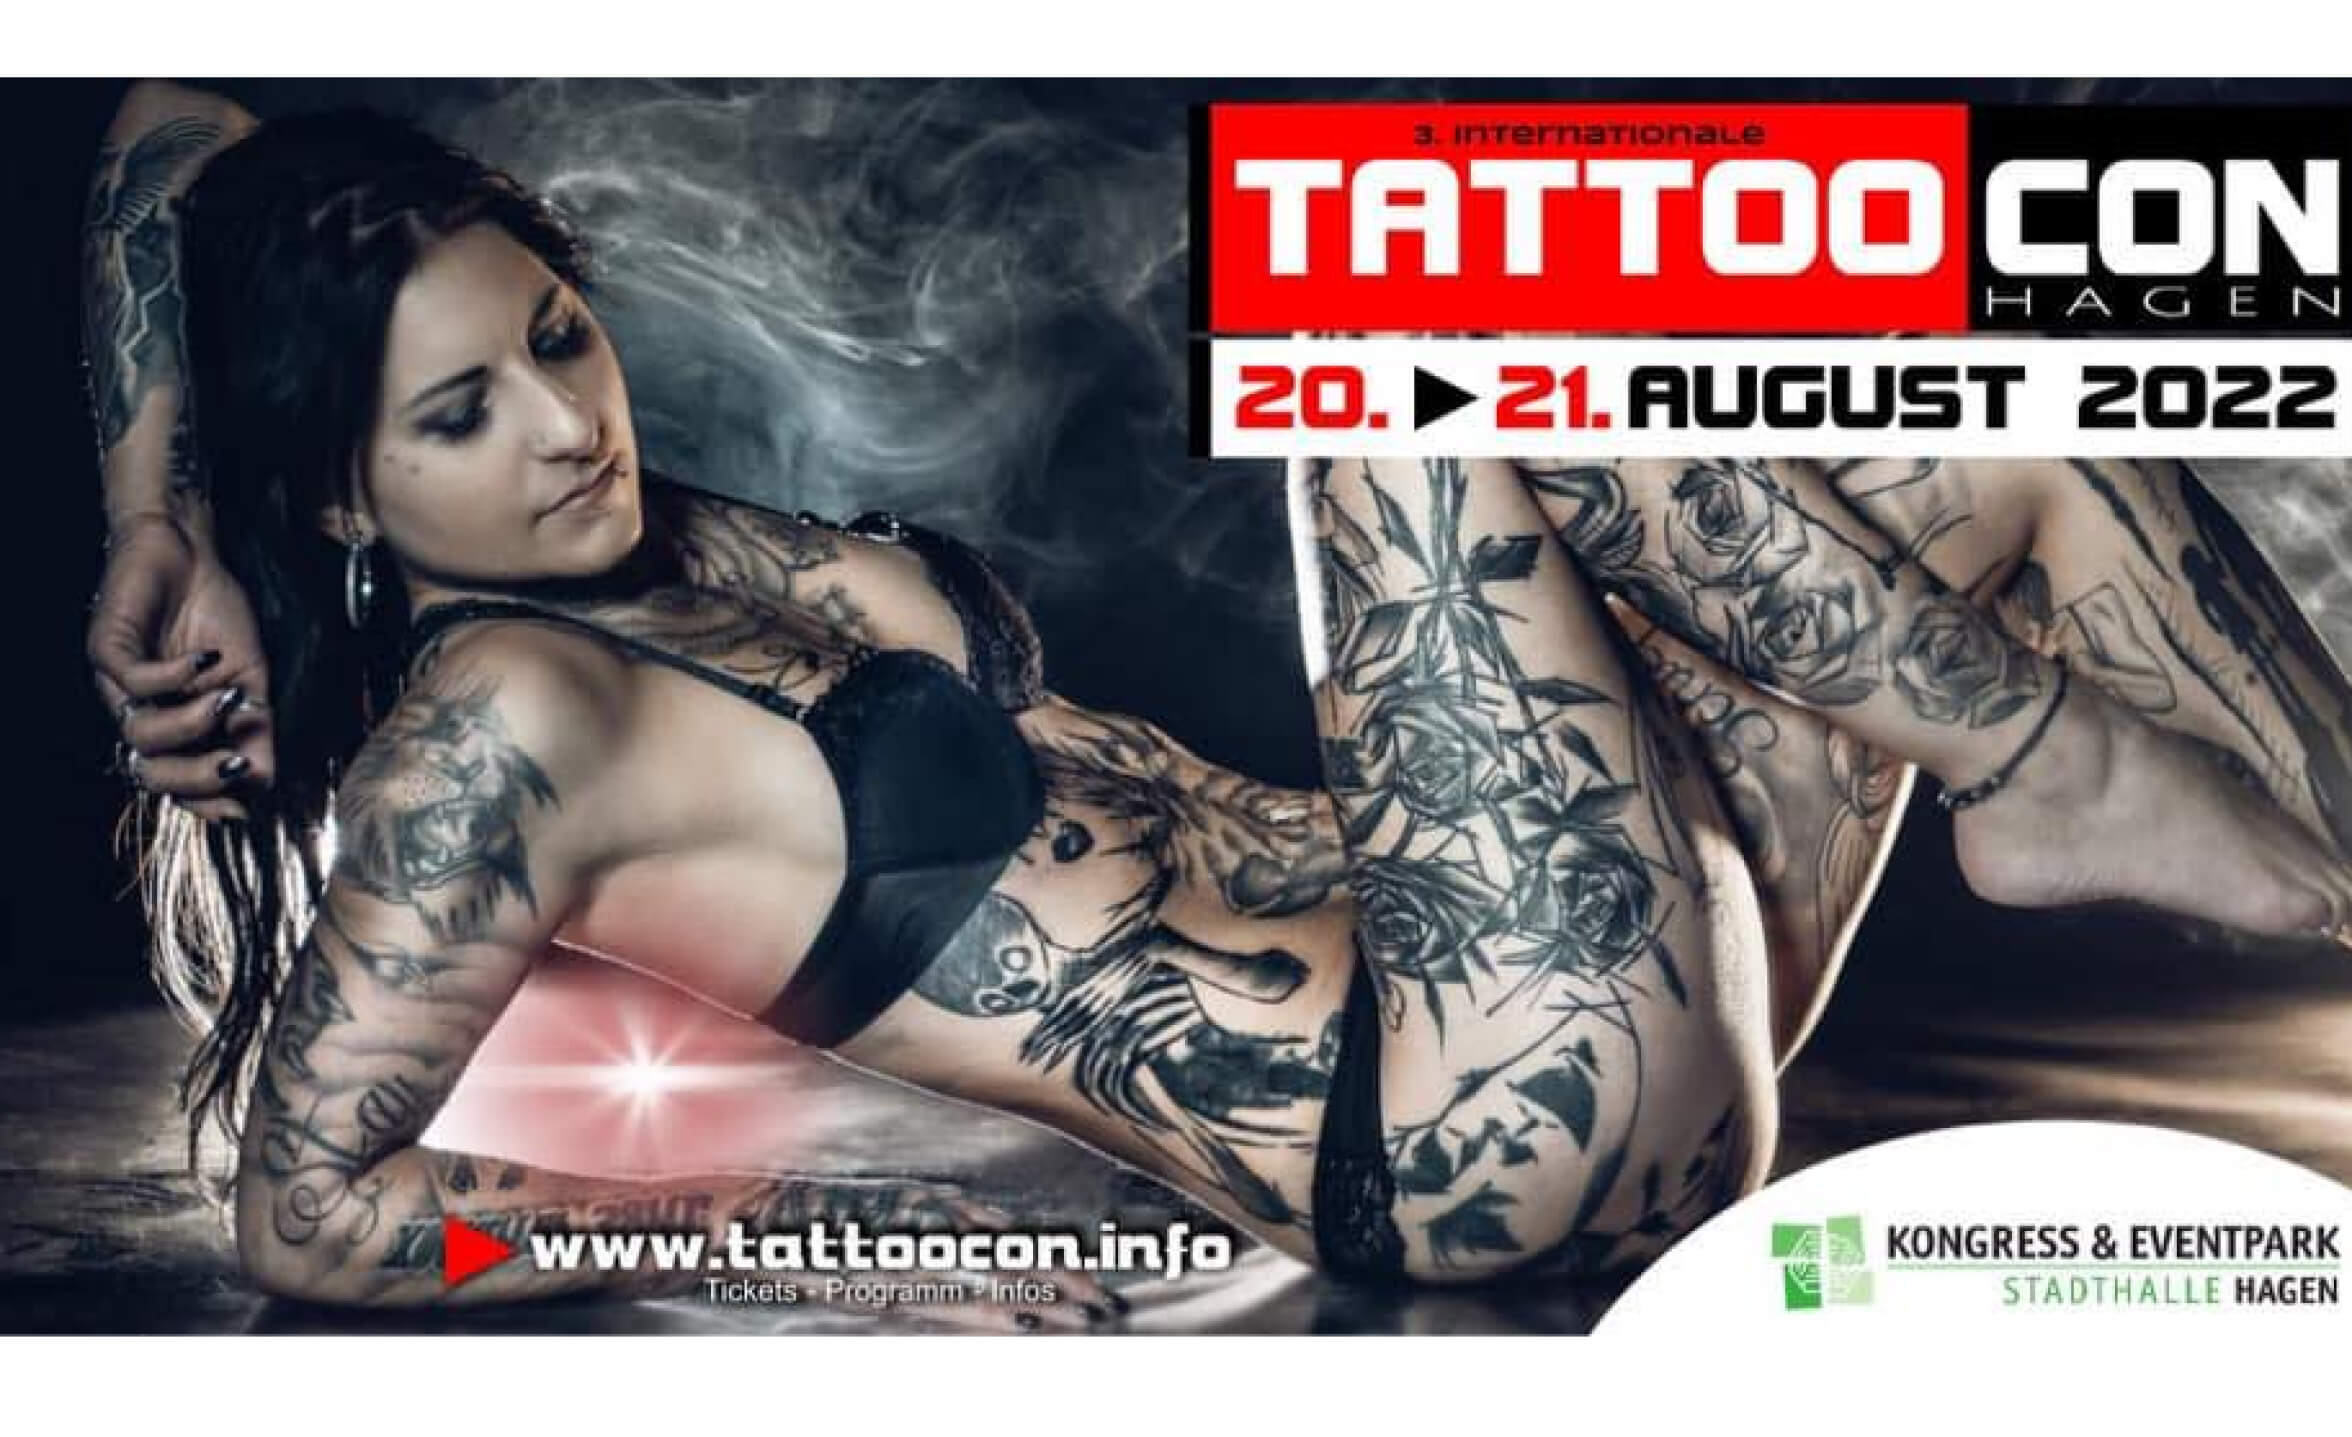 Event-Image for '3. Summer Tattoo Convention Hagen'